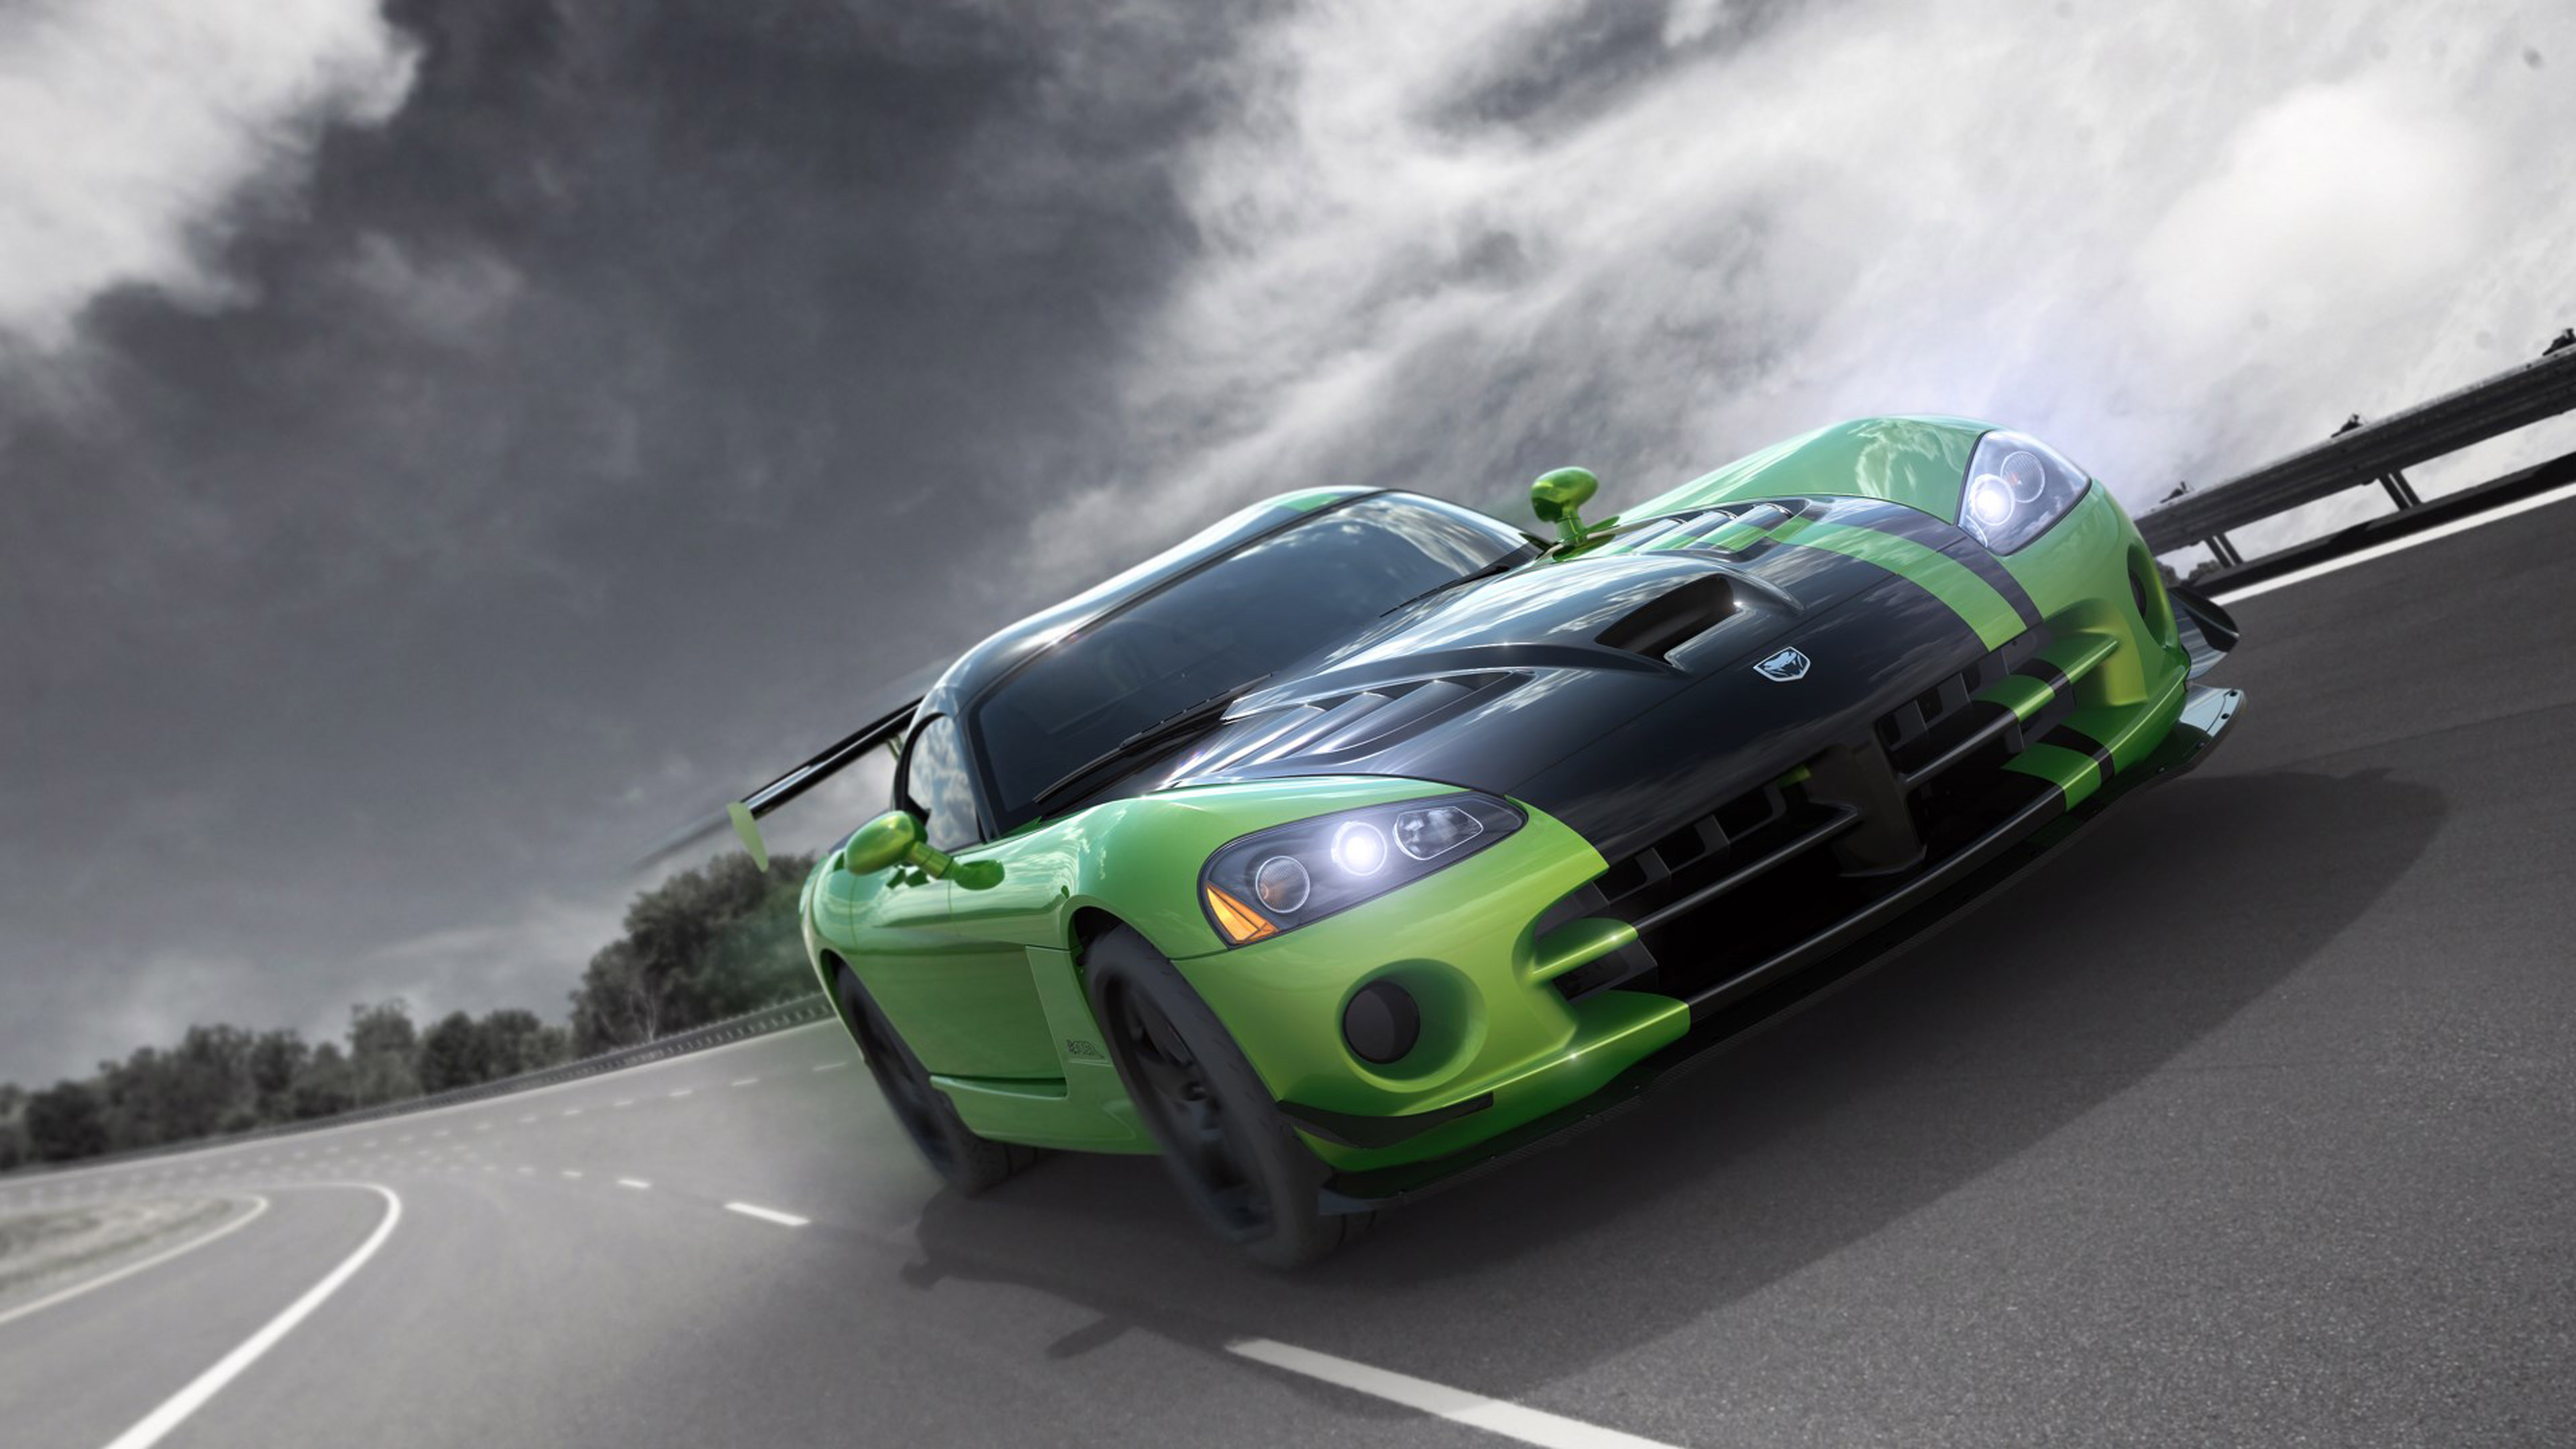 Green Dodge Viper driving on the road